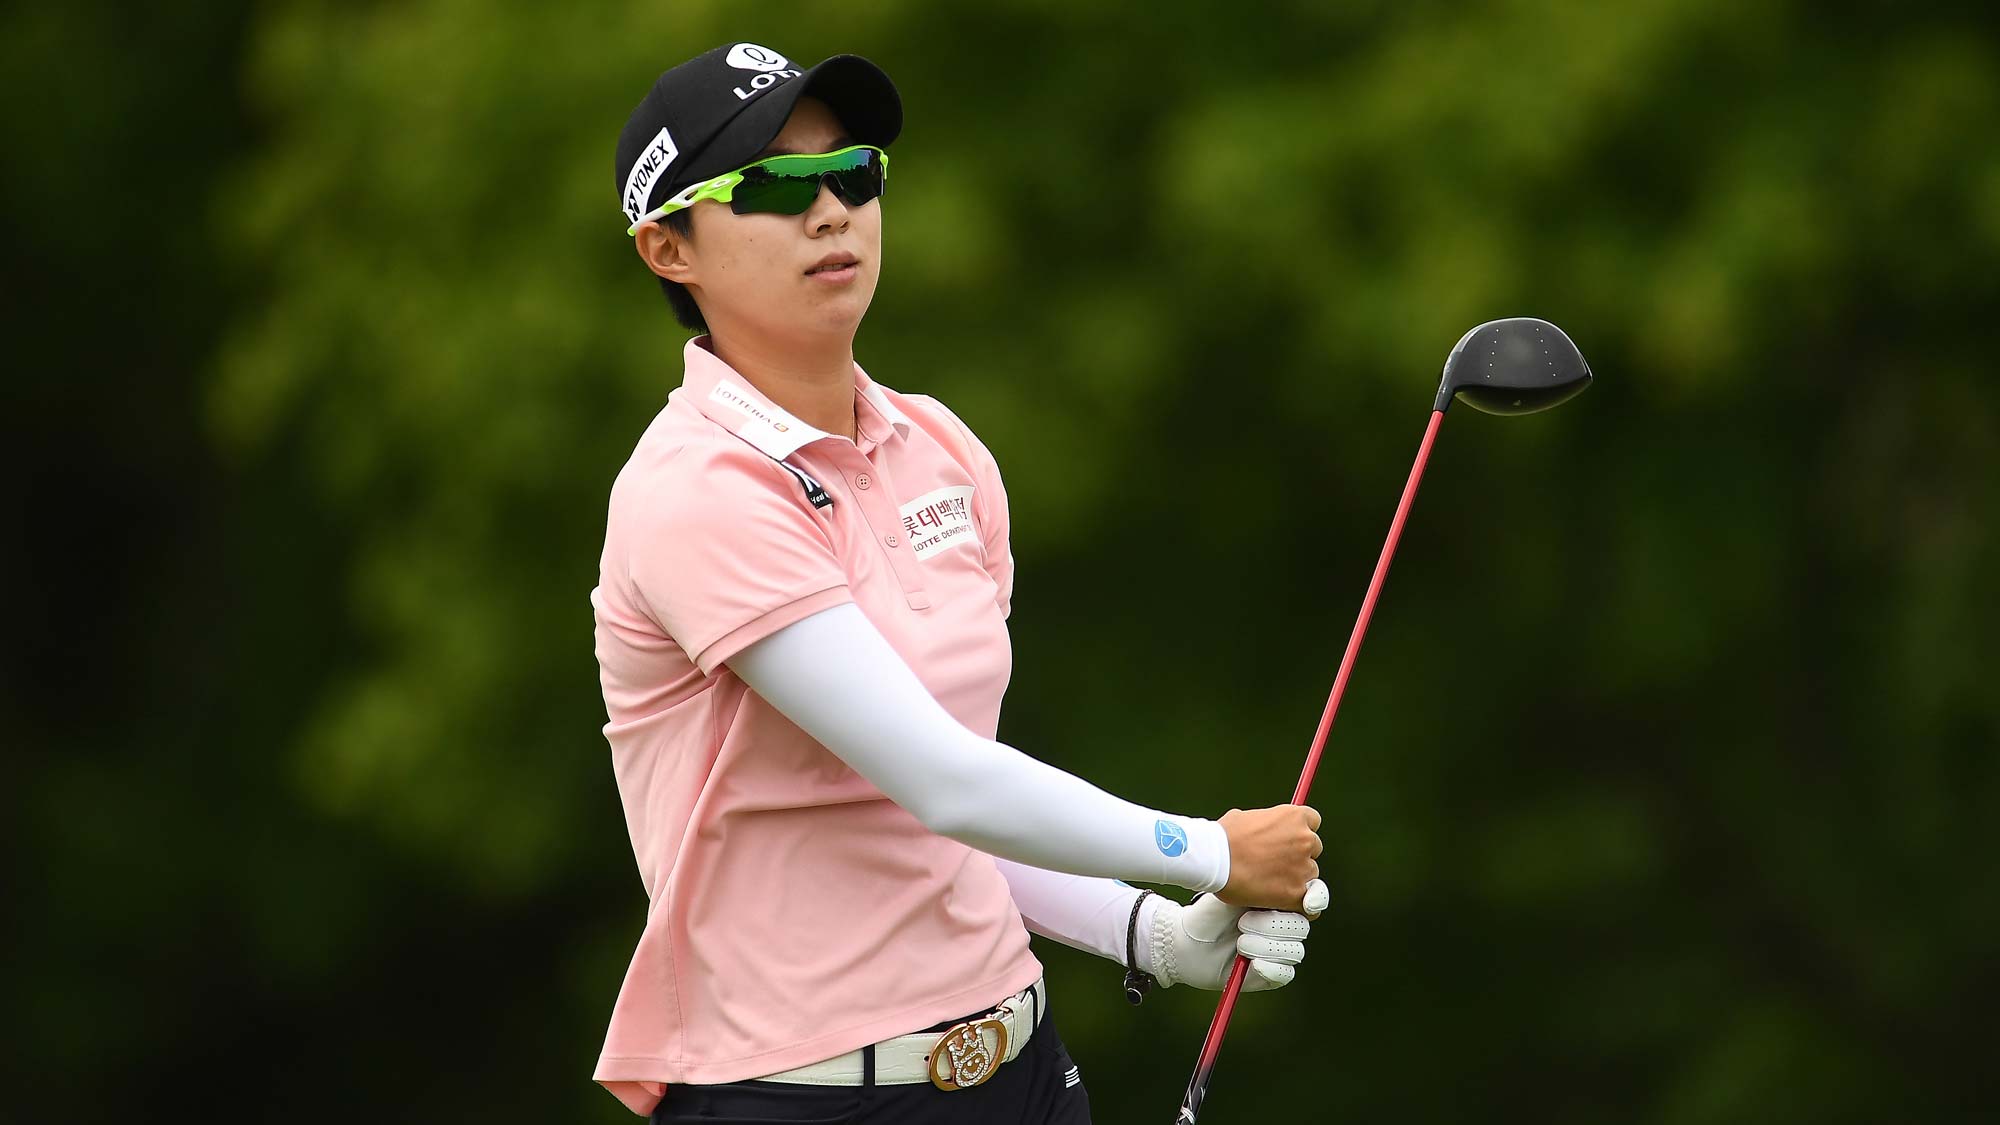 Hyo Joo Kim of Korea hits her tee shot on the 10th hole during the second round of the KPMG PGA Championship